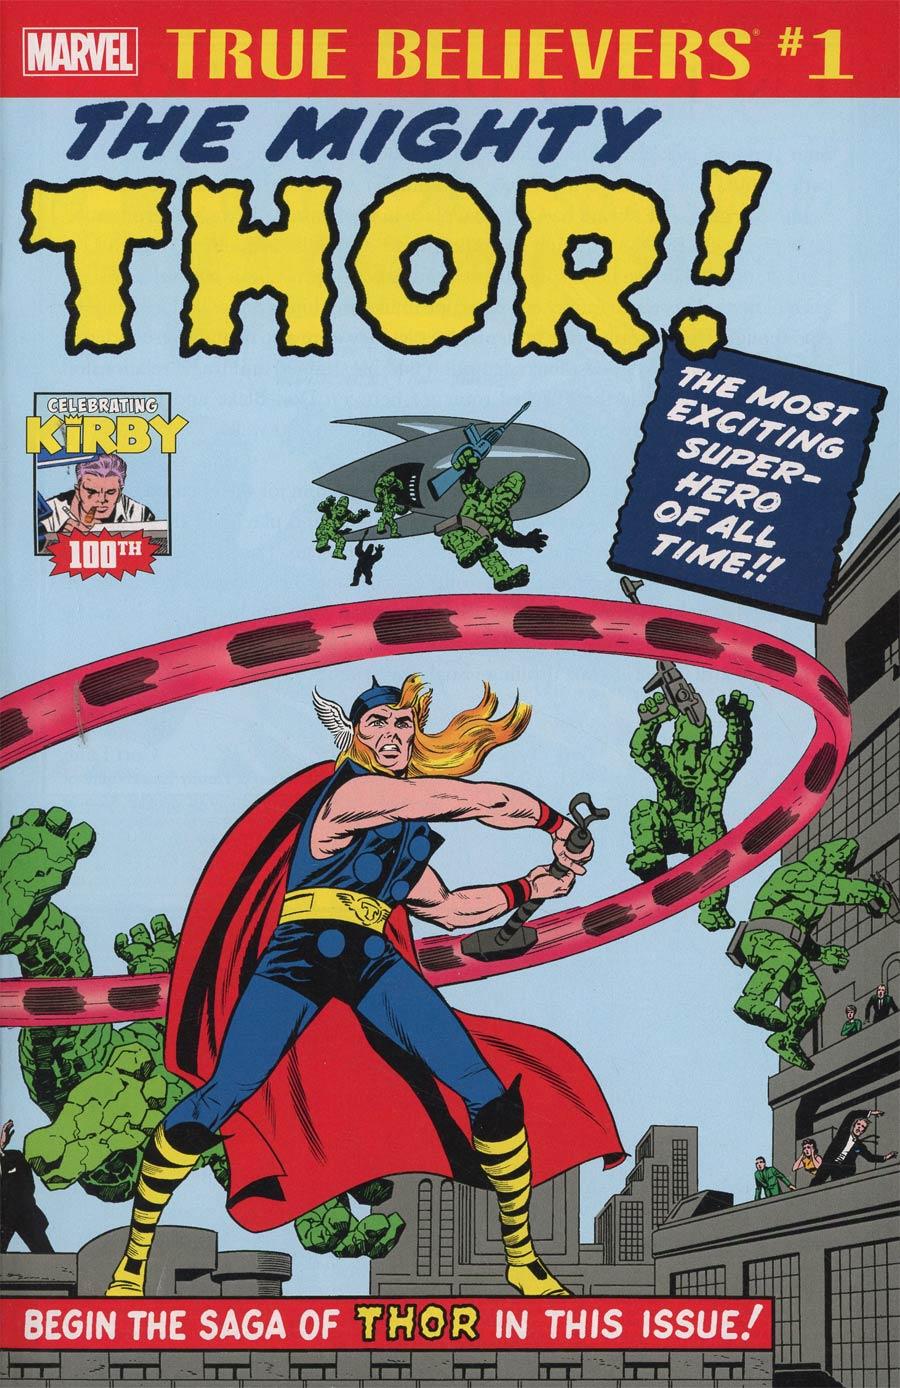 True Believers Jack Kirby 100th Anniversary Introducing Mighty Thor Vol. 1 #1